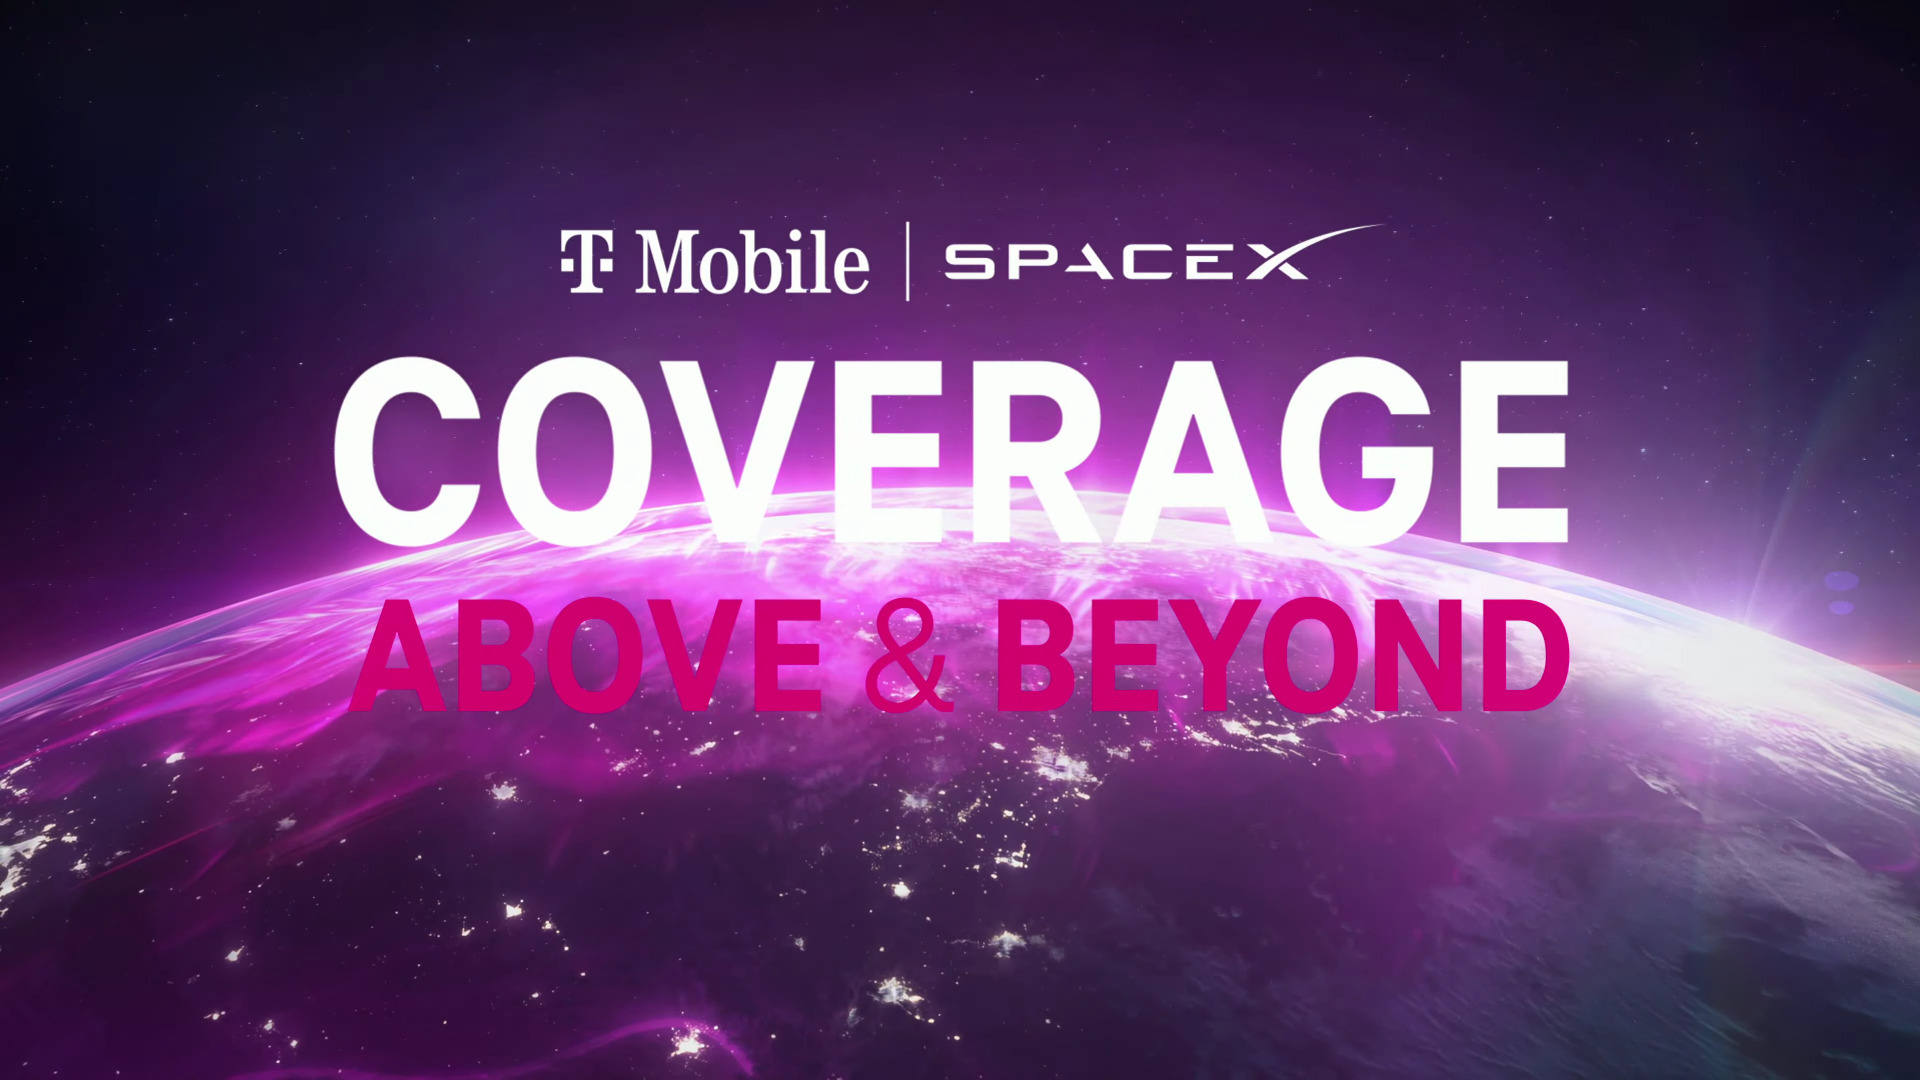 T-Mobile and SpaceX team up for Coverage Above & Beyond